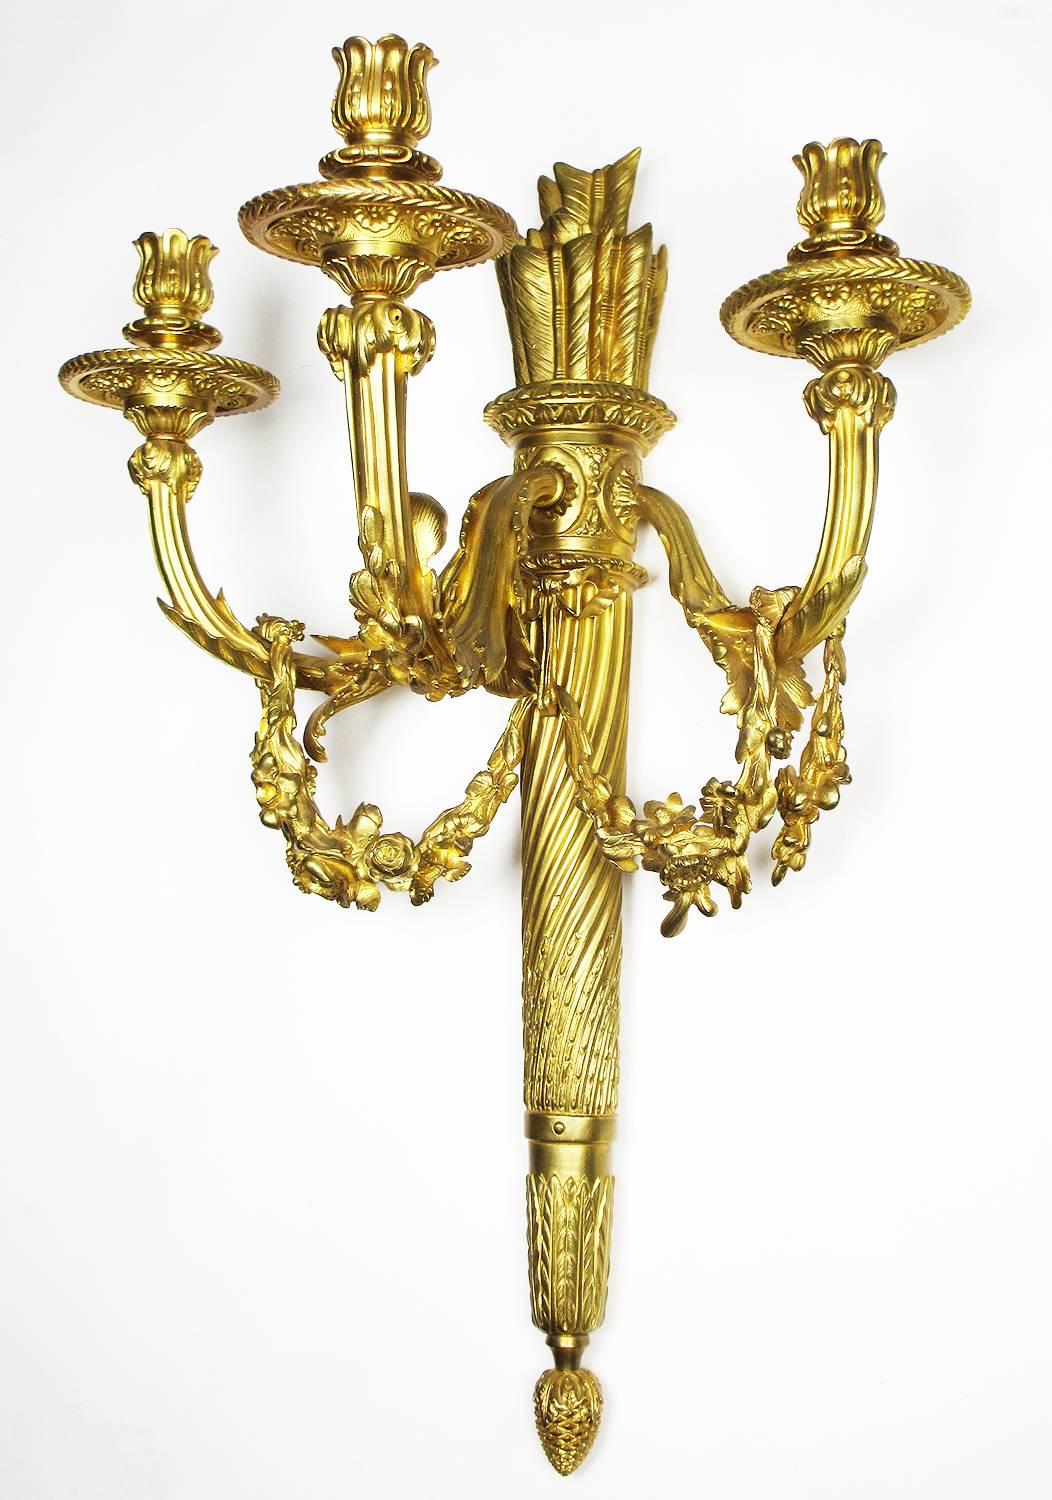 A very fine pair of French 19th-20th century Louis XVI style gilt bronze three-light wall sconces in the form of torches with flower swags over each candle-arm, circa 1900, Paris.

Height: 23 inches (58.4 cm).
Width: 16 1/2 inches (41.9